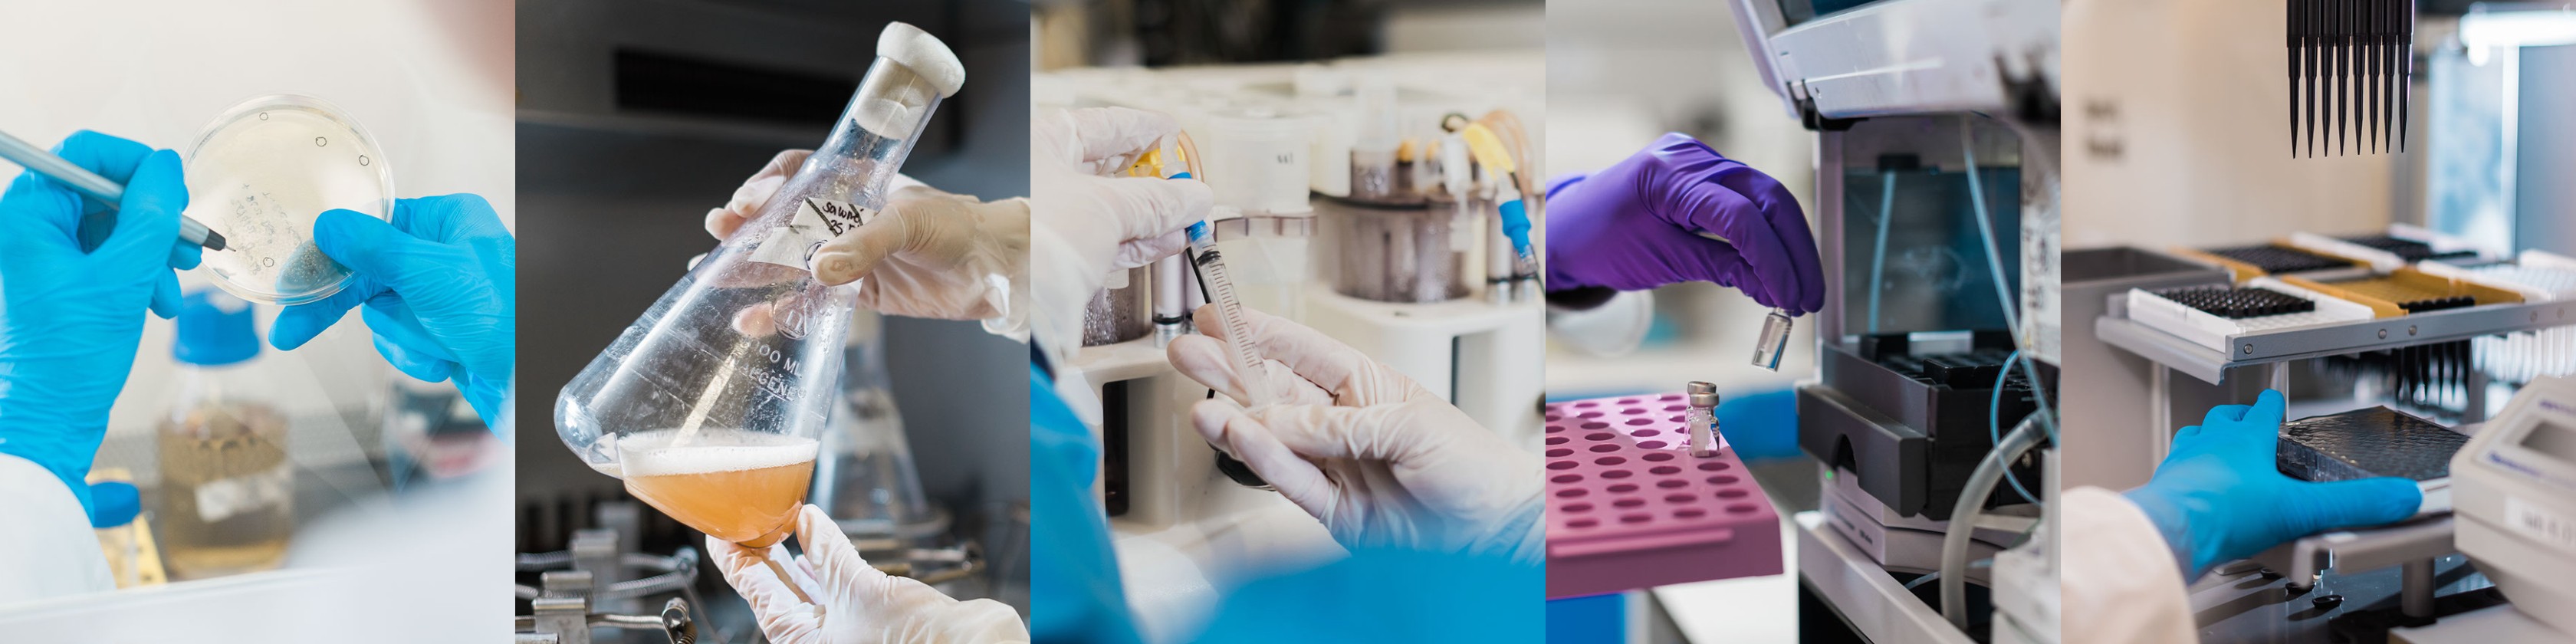 The Vax-Hub project has worked on improving and optimising existing manufacturing processes to change the way vaccines are manufactured, stabilised and stored. © Vax-Hub